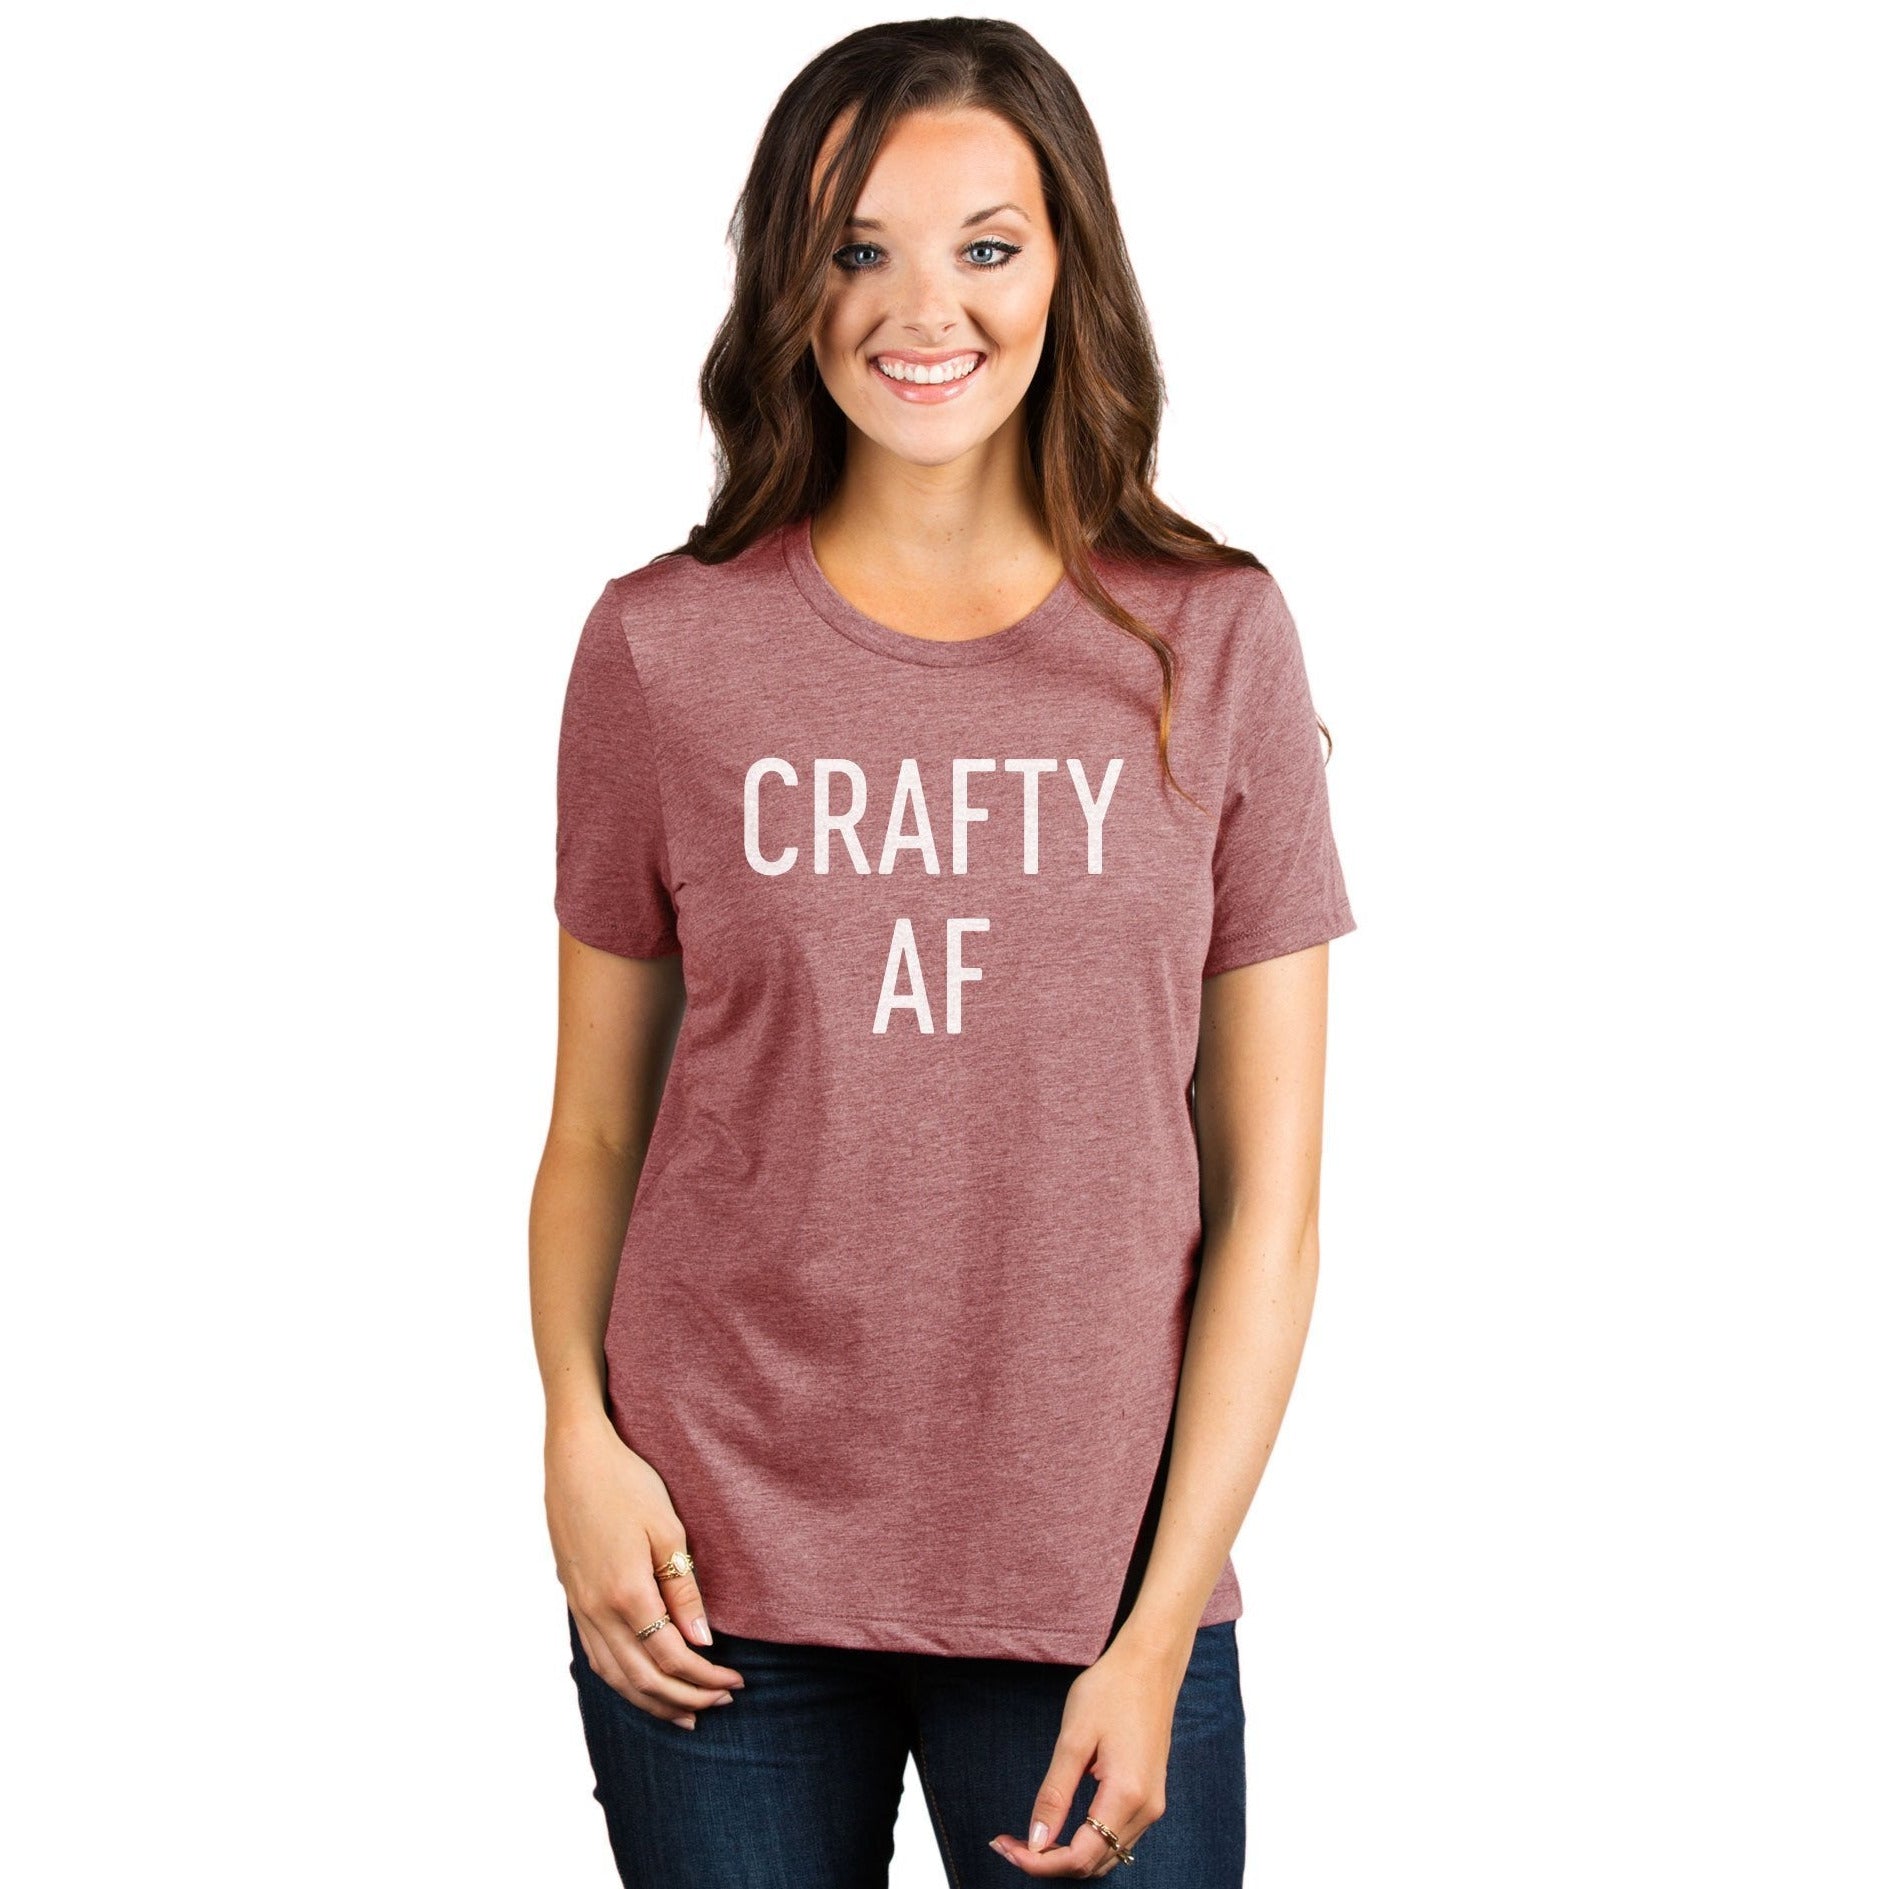 Crafty AF Women's Relaxed Crewneck T-Shirt Top Tee Heather Rouge Model
